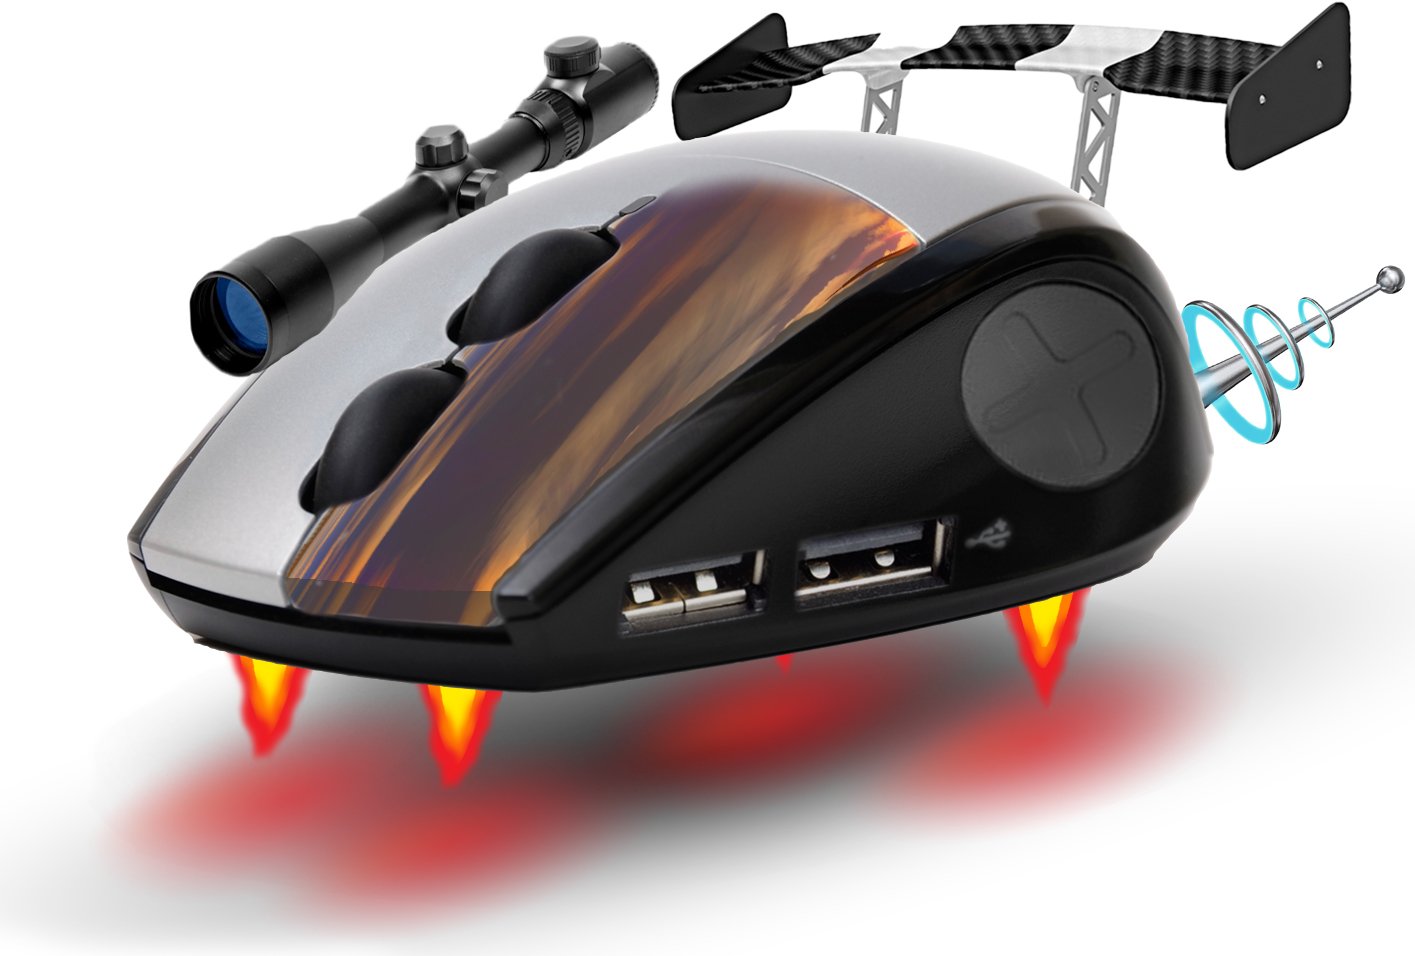 The Mouse of the Future, complete with jets, scope, and usb ports